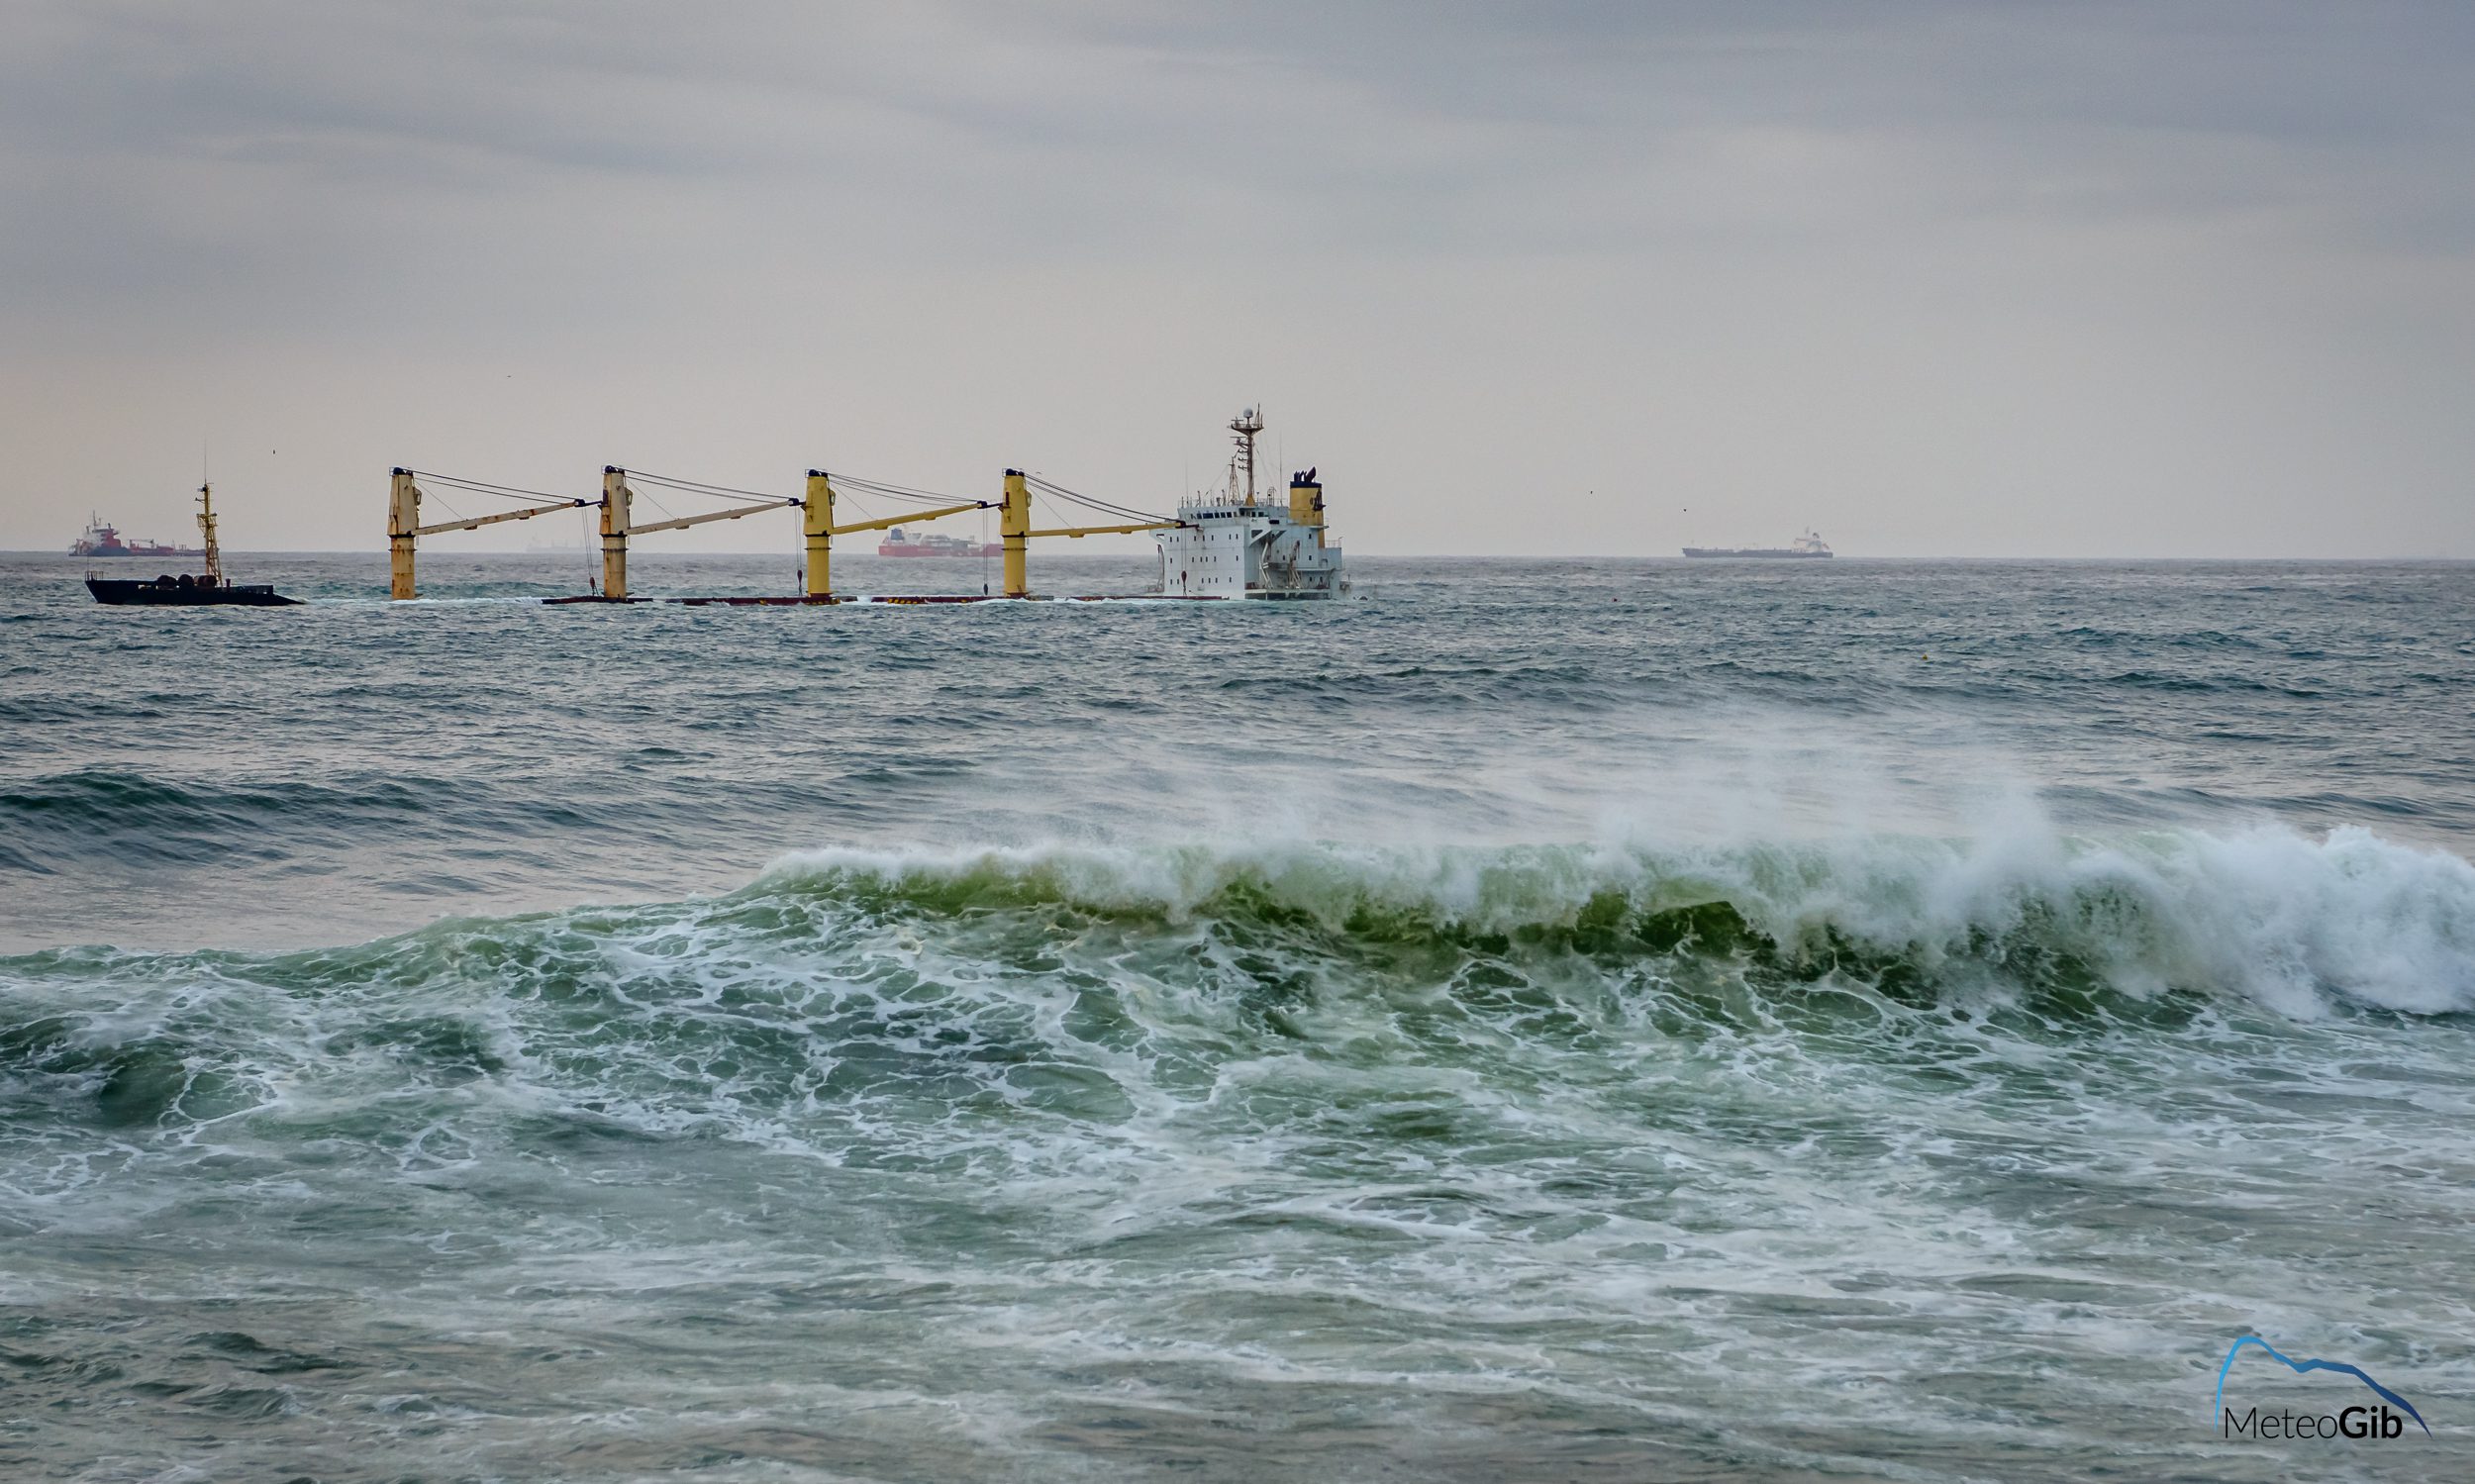 Photos: Gibraltar Shipwreck Survives Heavy Weather and Waves